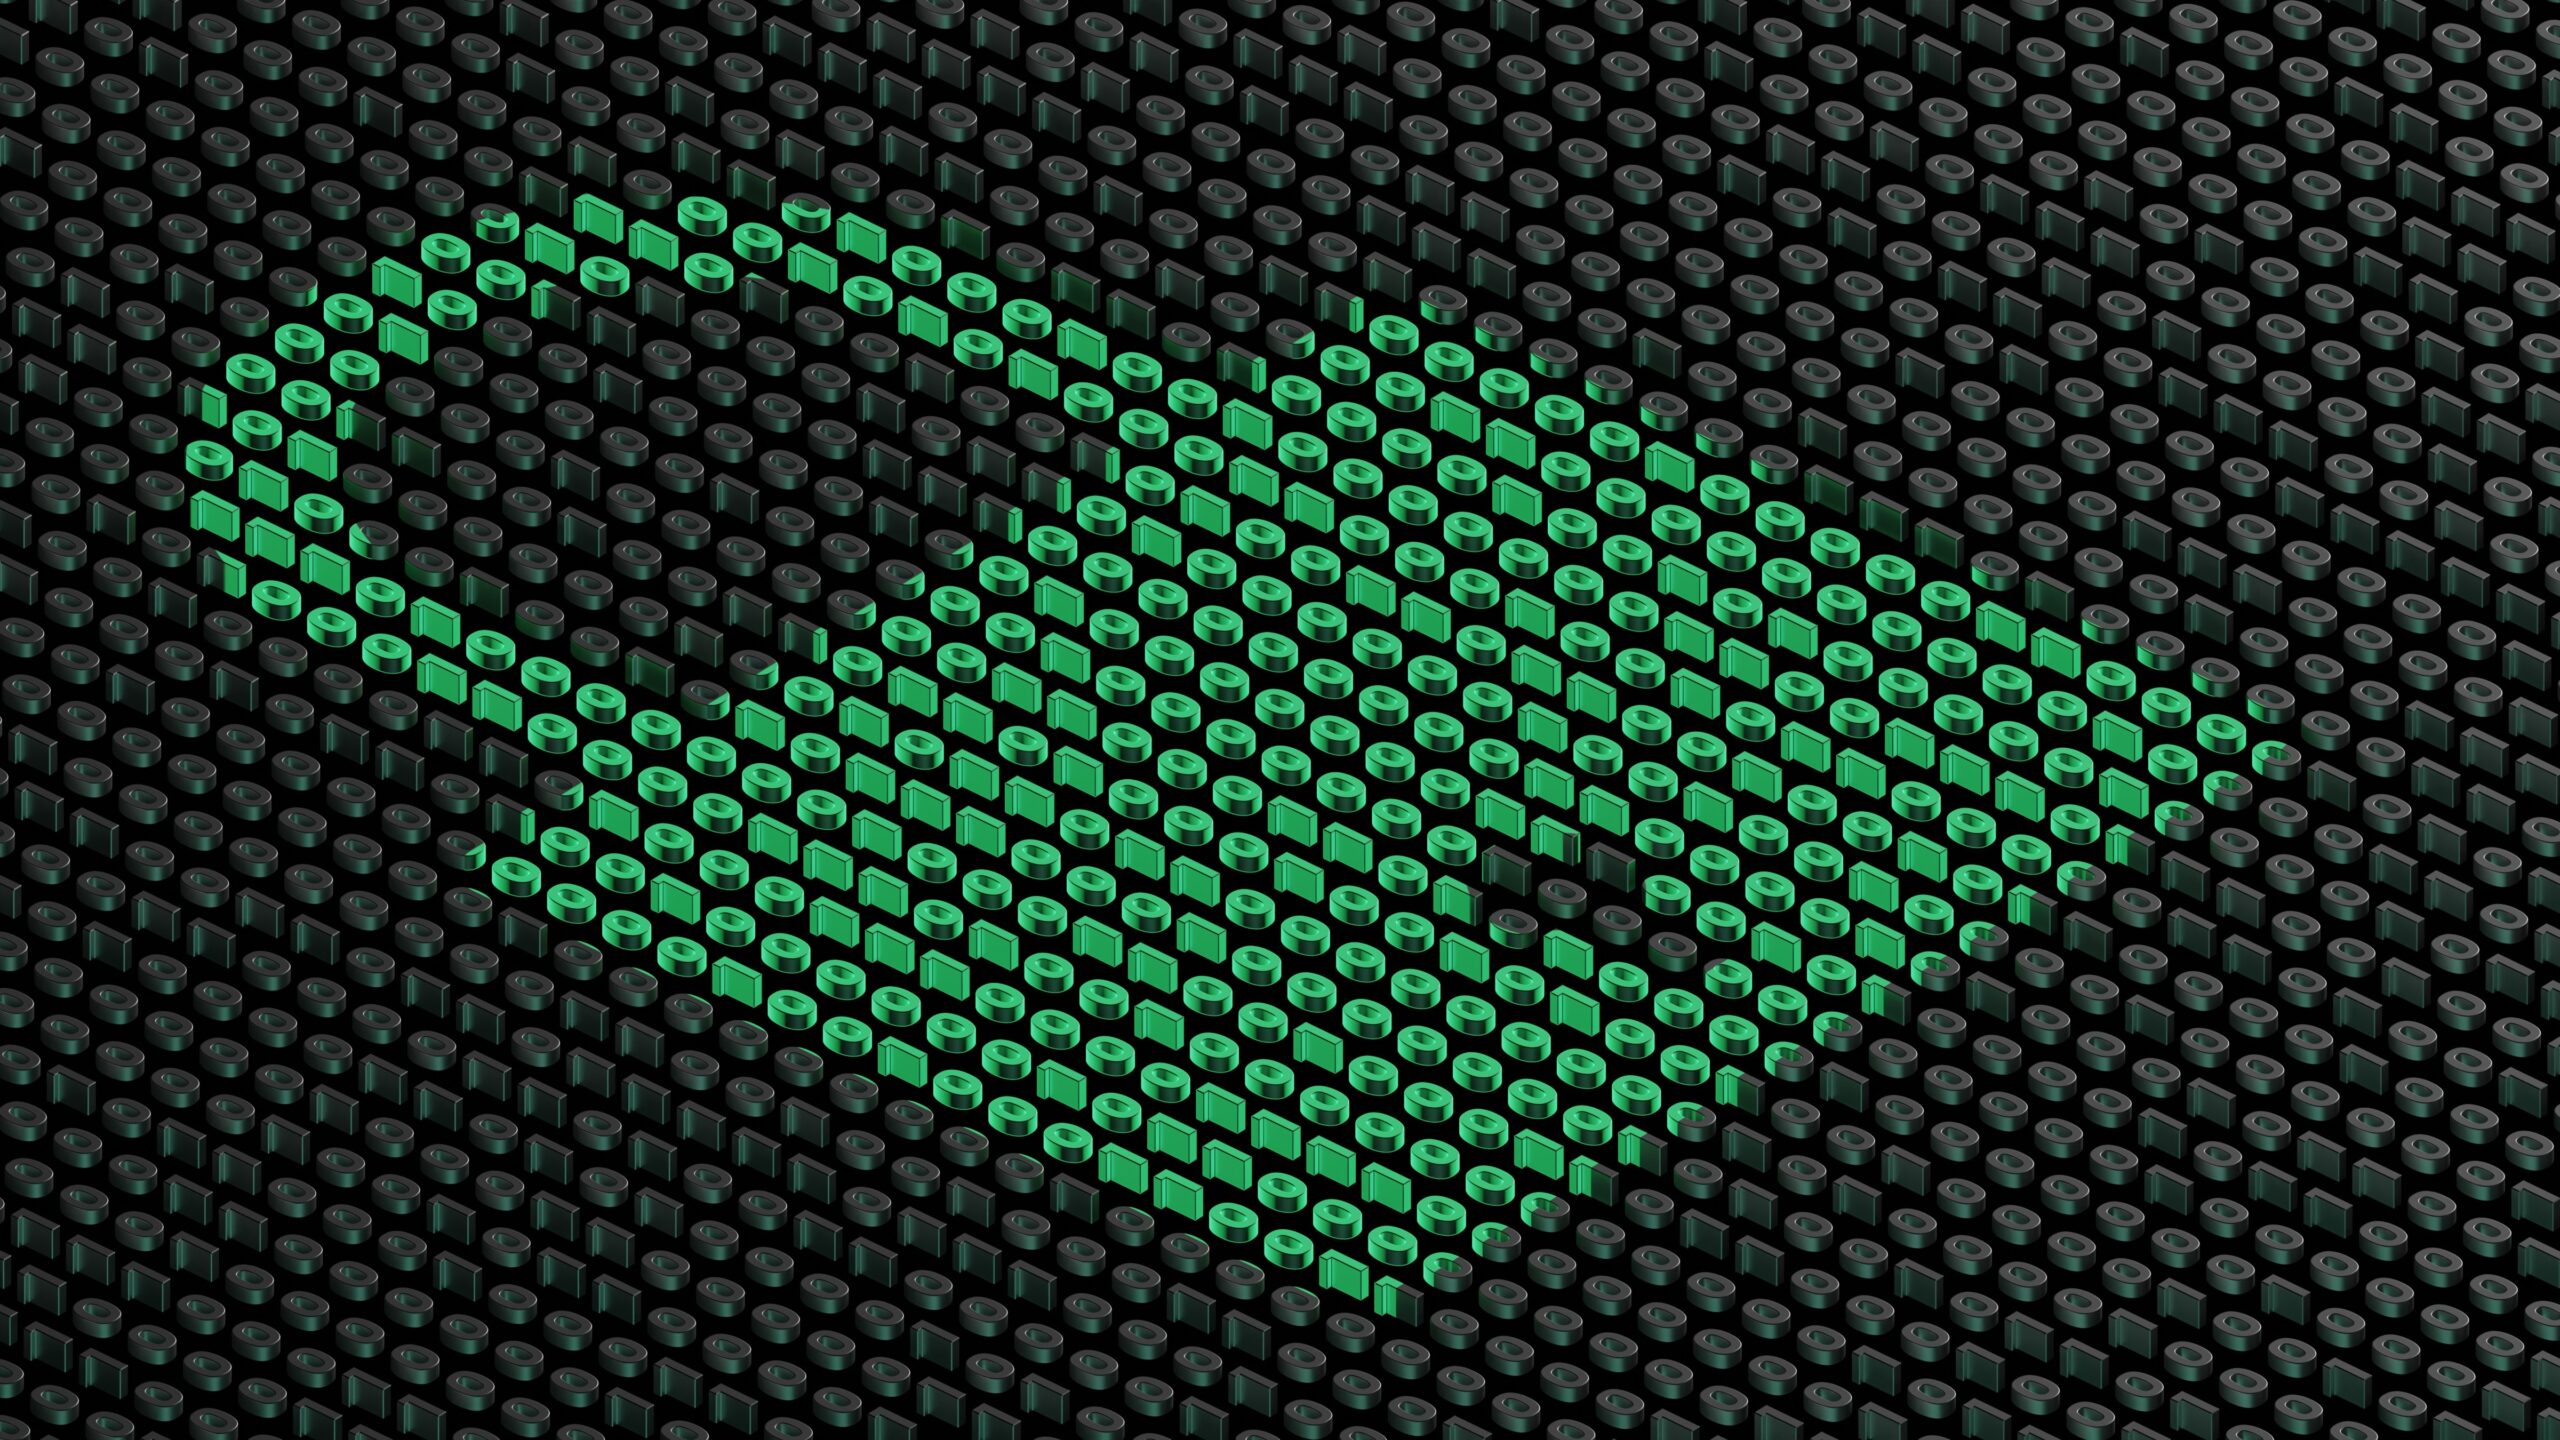 A green padlock on a black background represents online privacy.